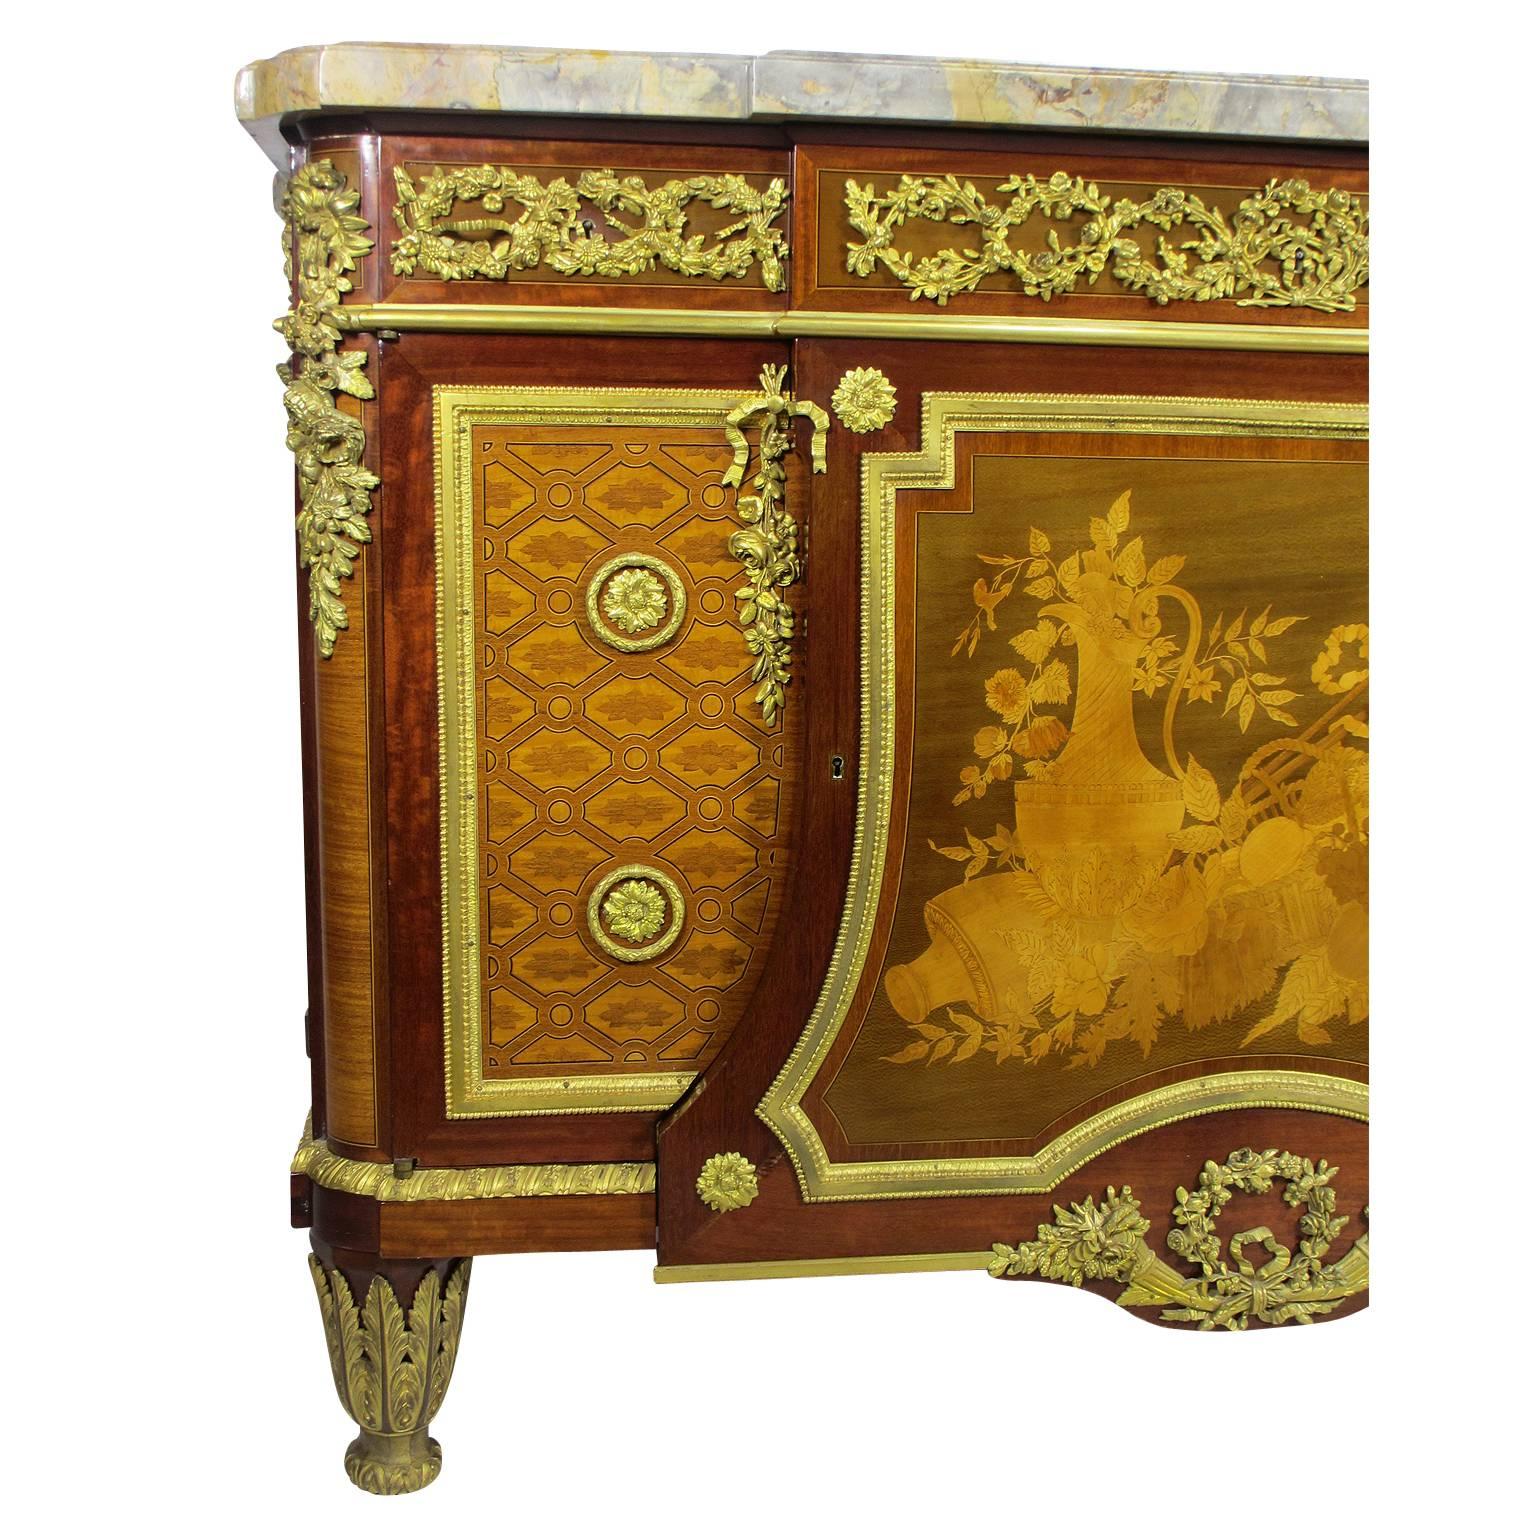 Fine French 19th Century Louis XVI Style Gilt-Bronze Mounted Marquetry Commode For Sale 2